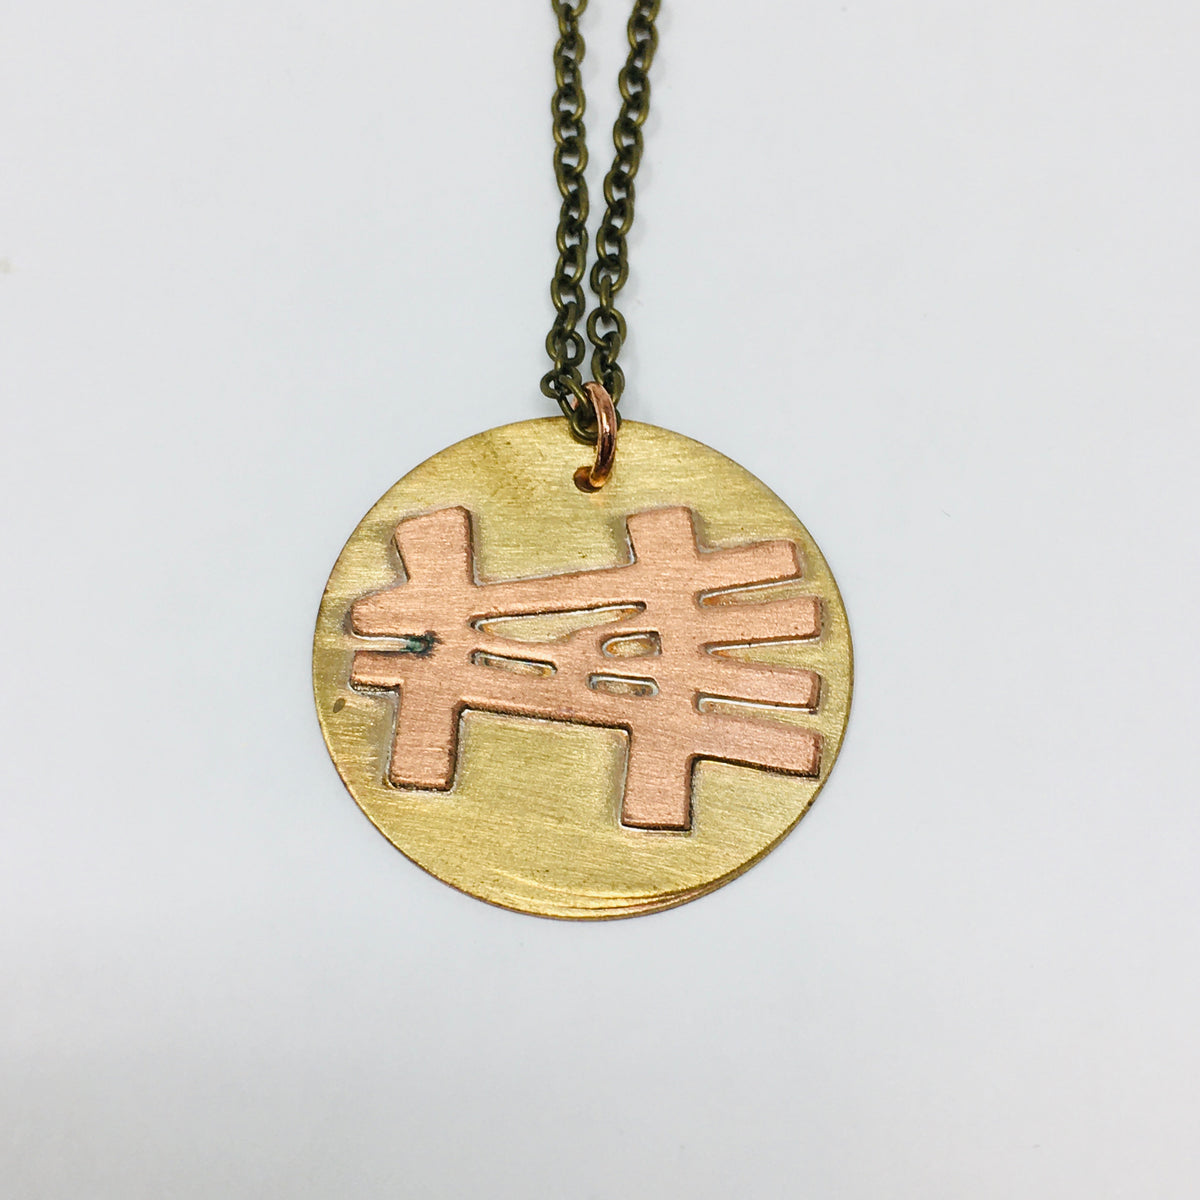 Franklin and Almonaster Street Crossing Necklace